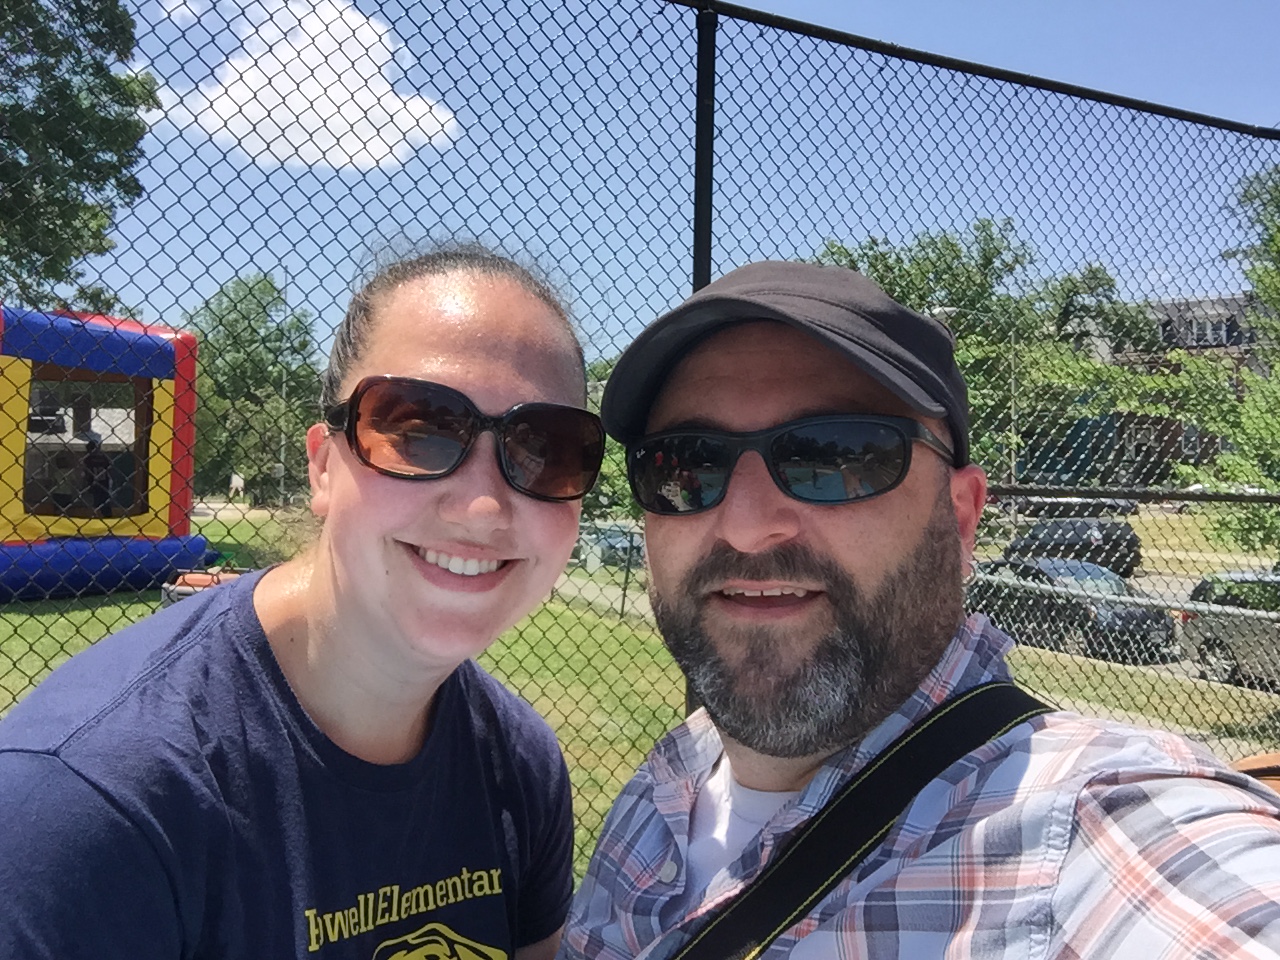   Amy Symonds, Powell Elementary teacher, poses for a selfie with Drew at the Powell Carnival.    5/30/15  